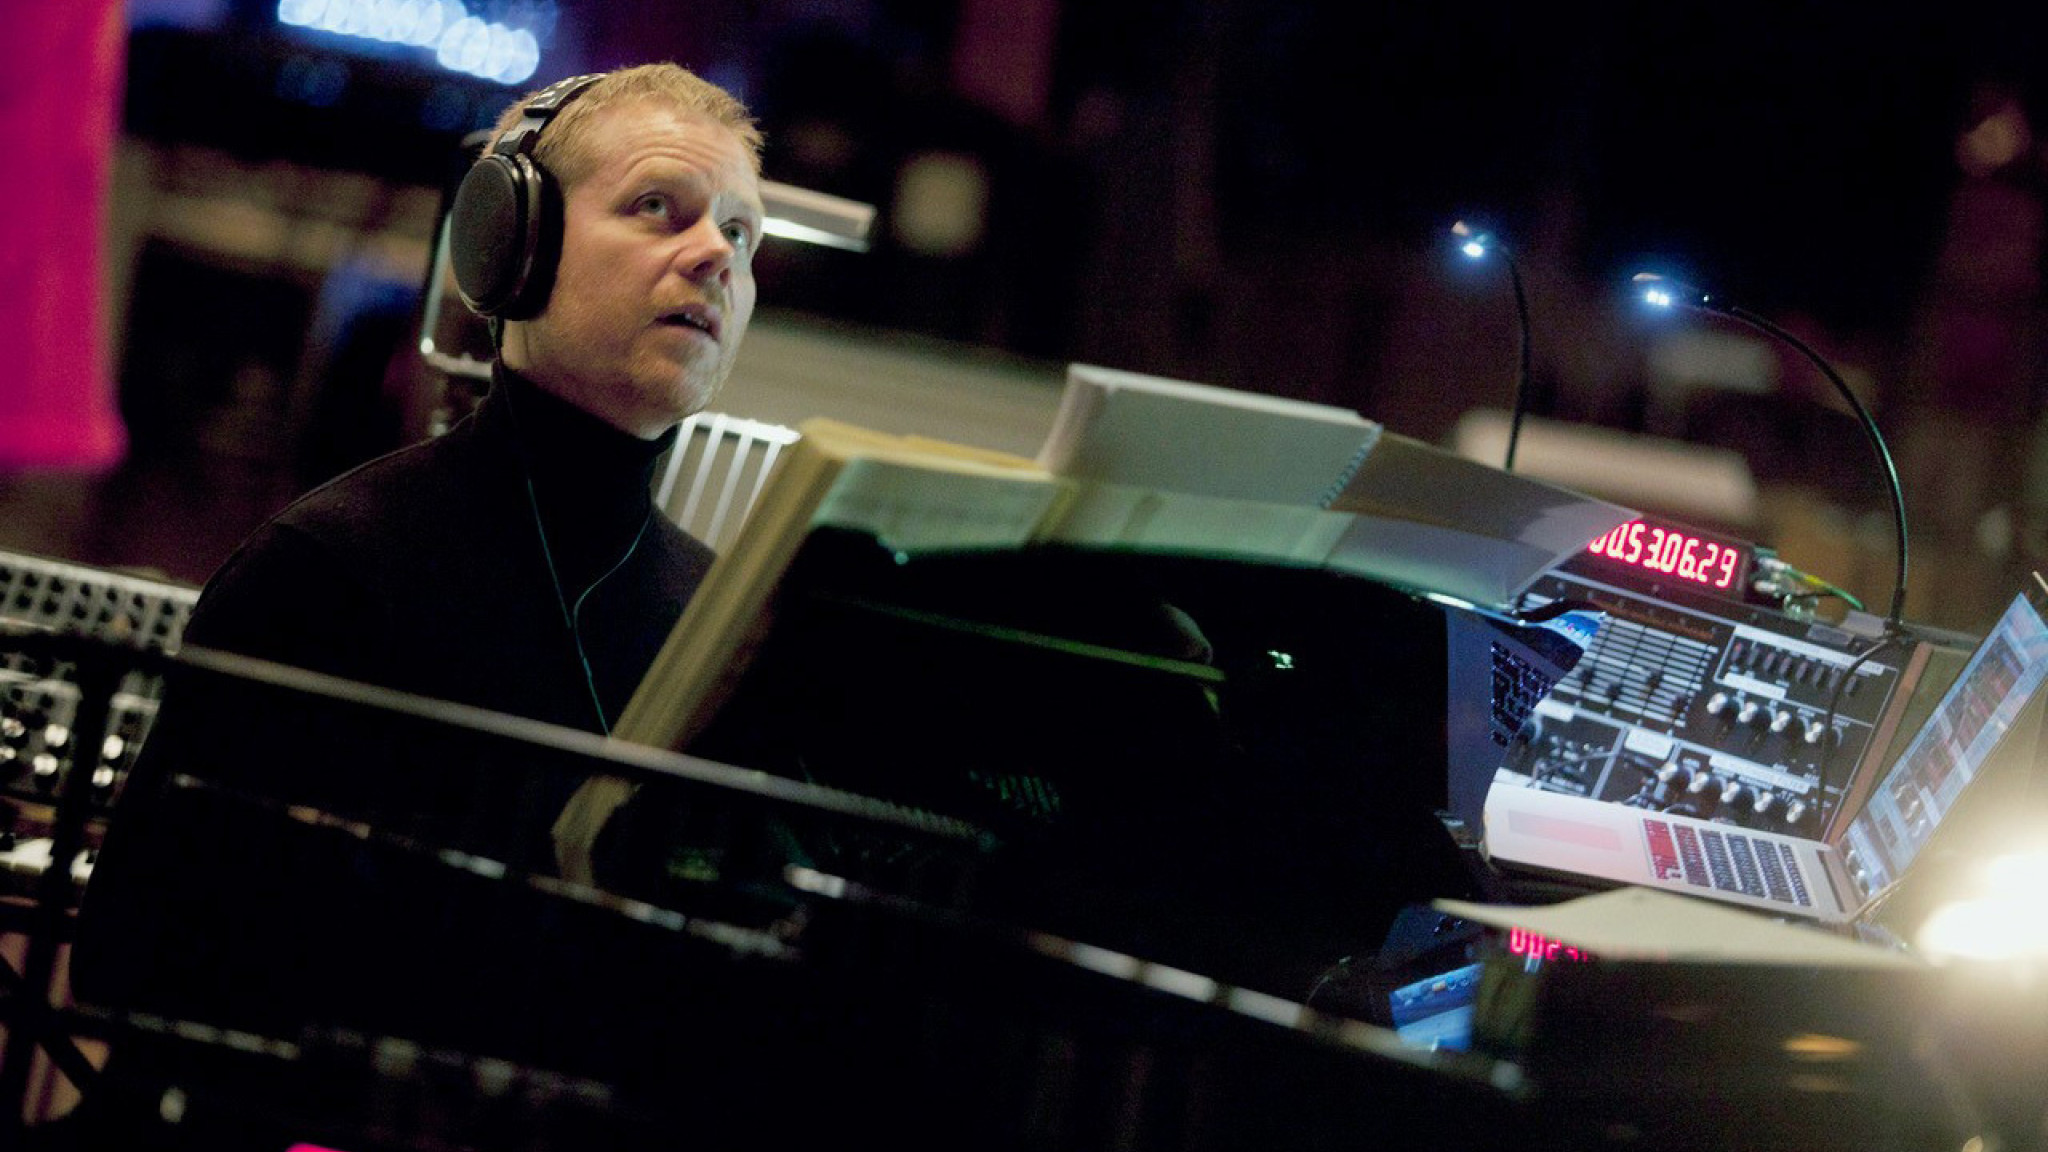 Max Richter's SLEEP - Global Radio Broadcast of his 8-hour lullaby this easter weekend